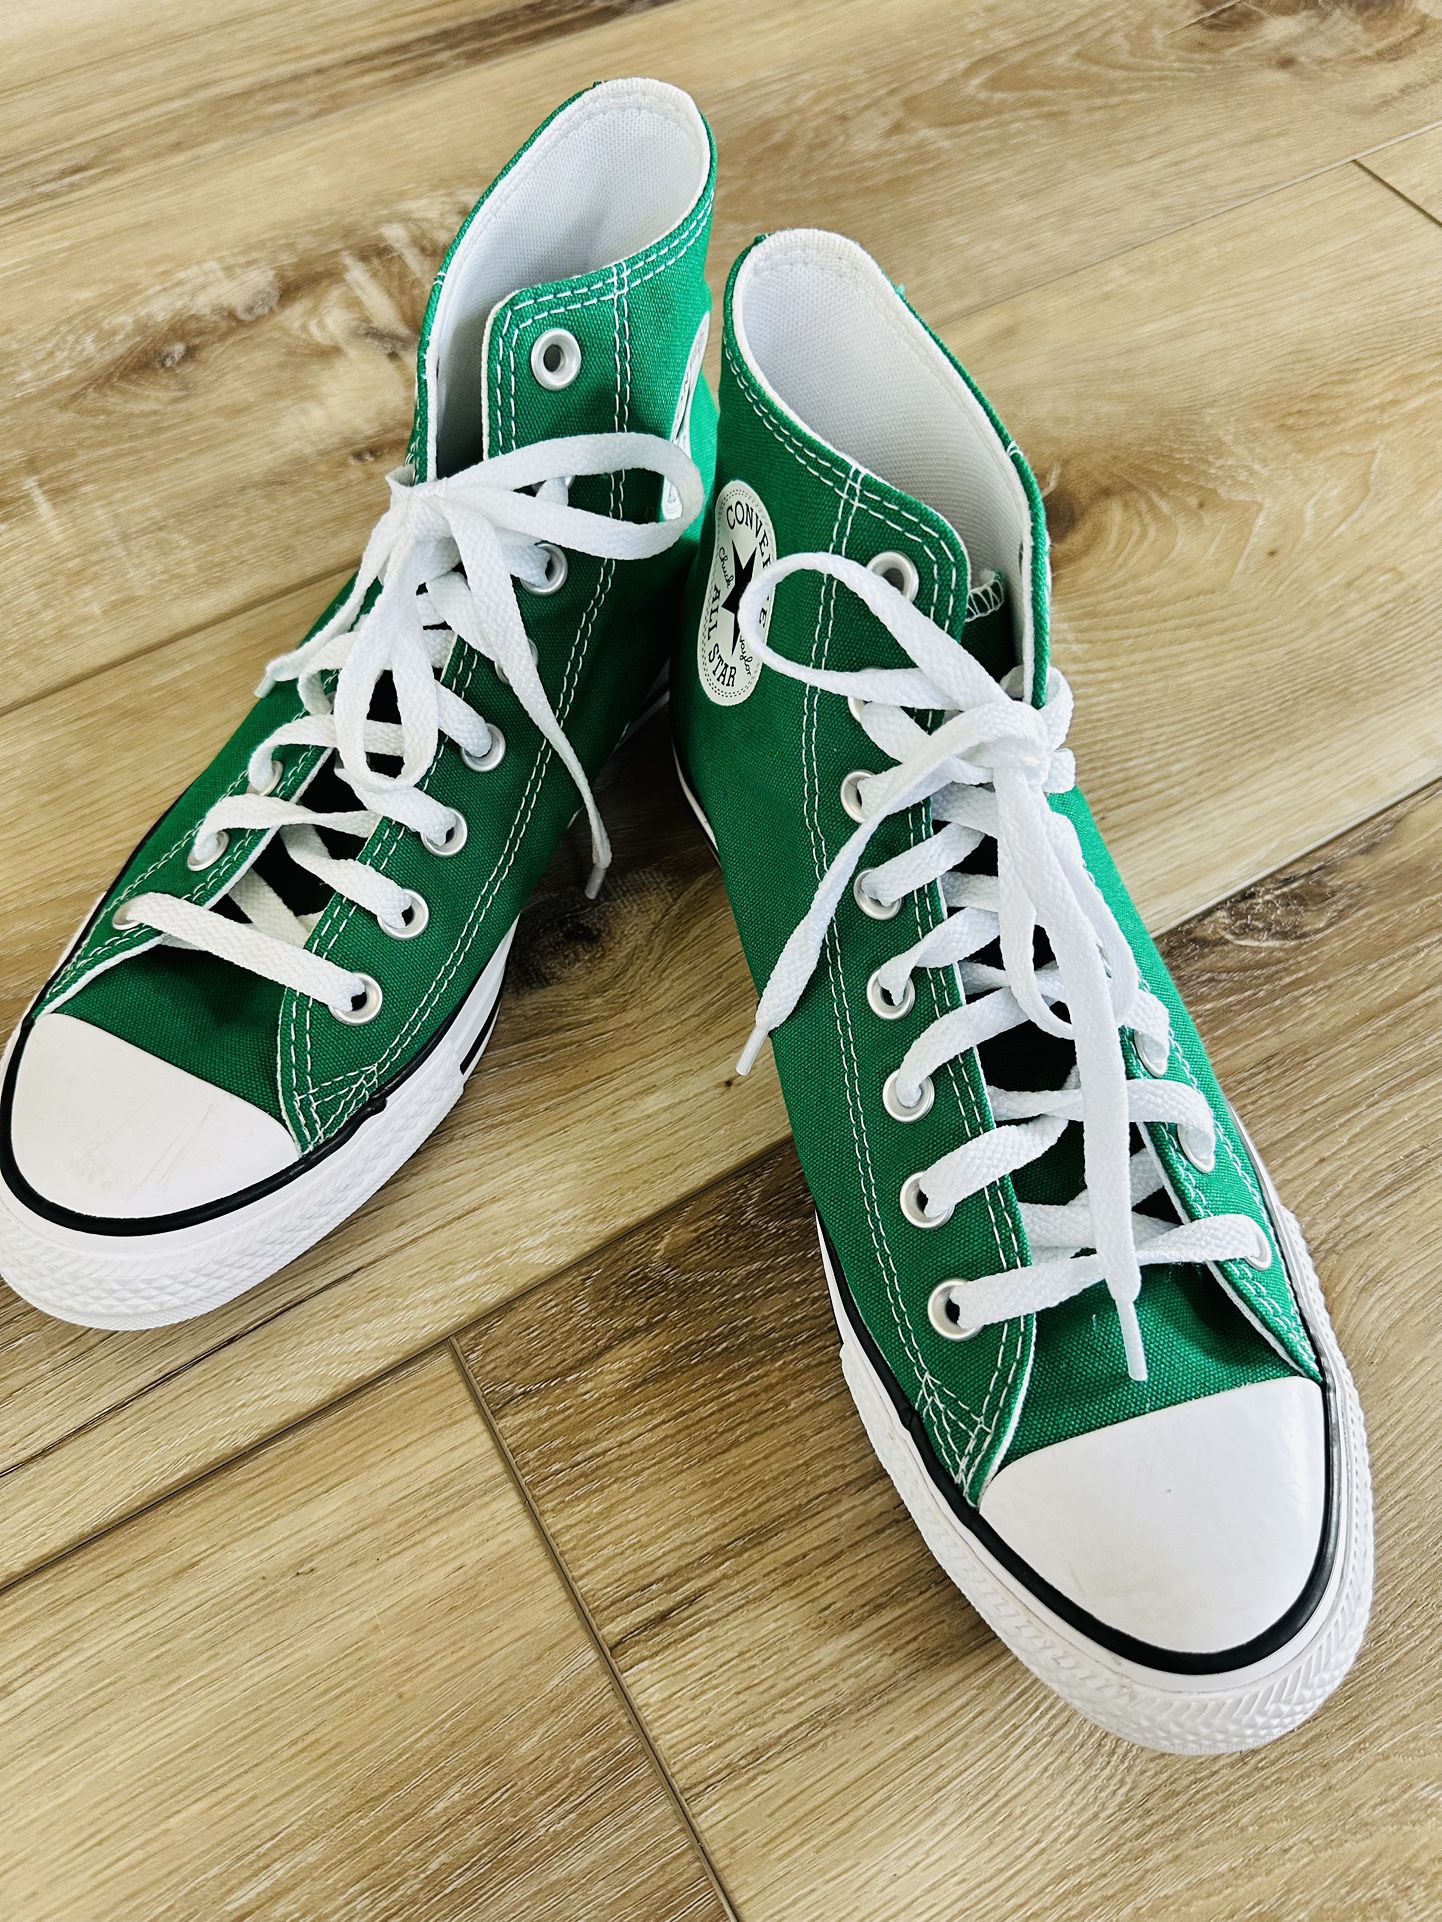 Converse All Star Green Shoes